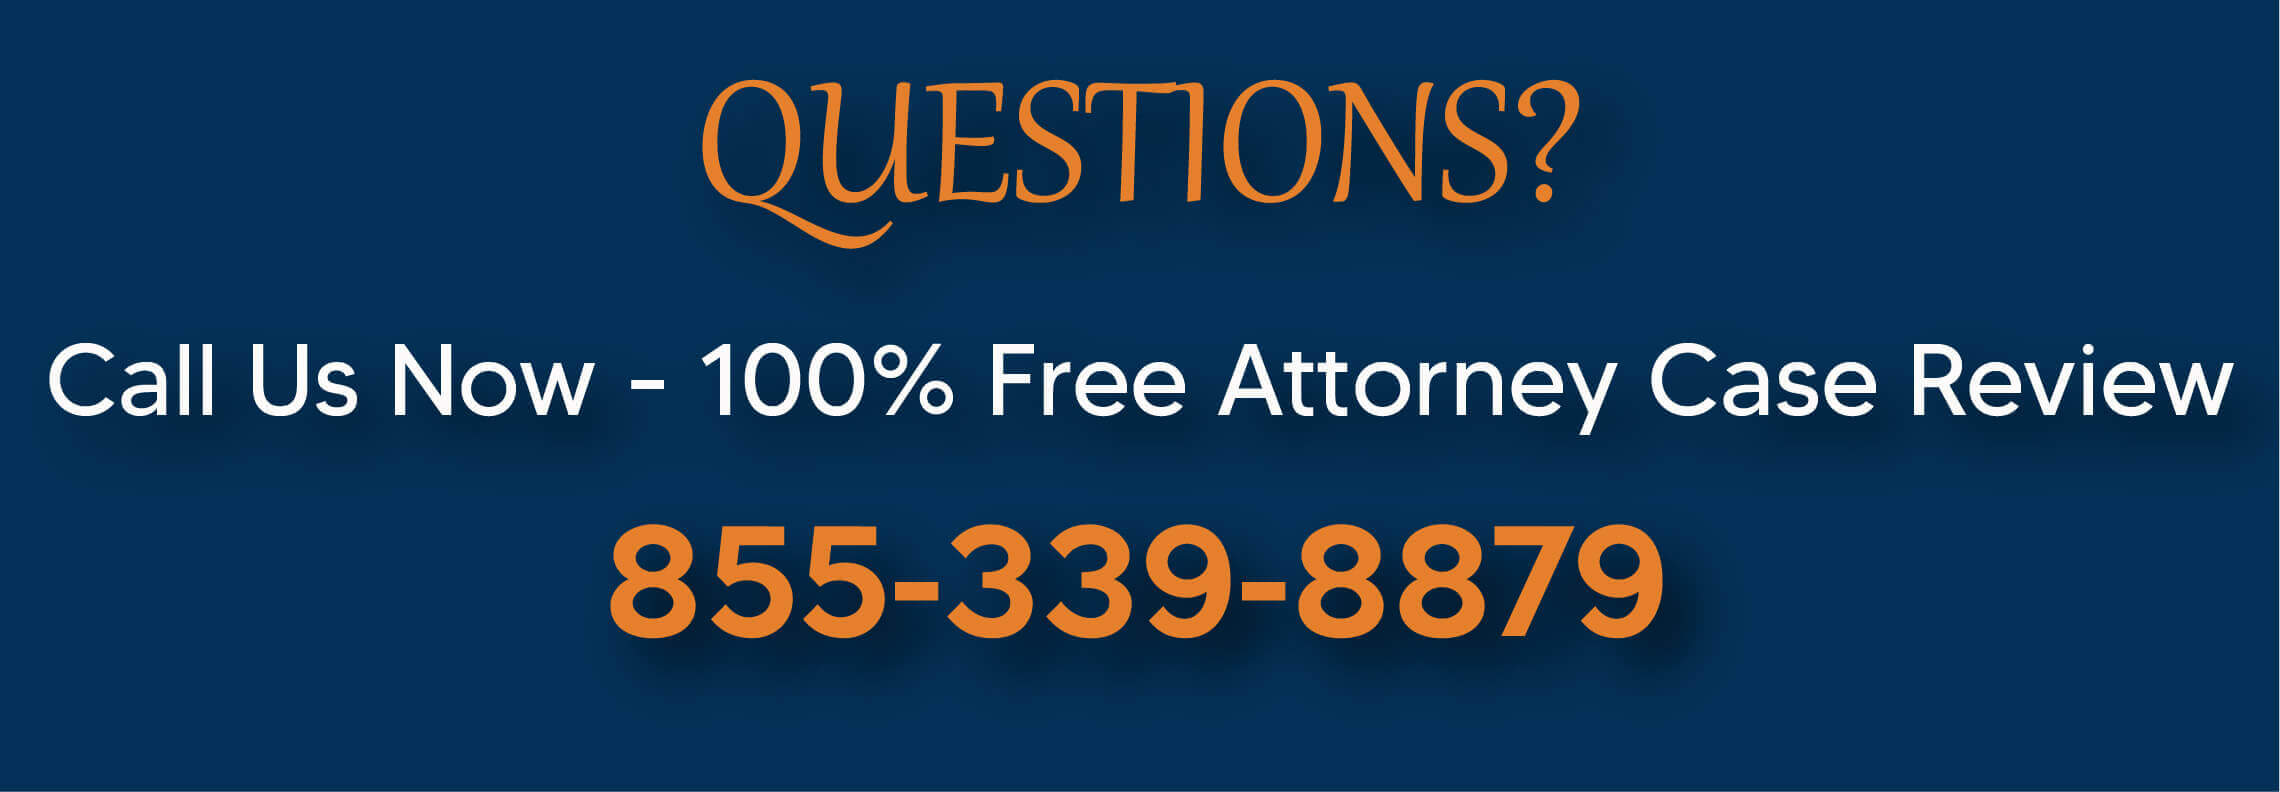 Awning Rental Property Accident Injury Lawyer Attorney lawsuit liability compensation lawyer attorney sue